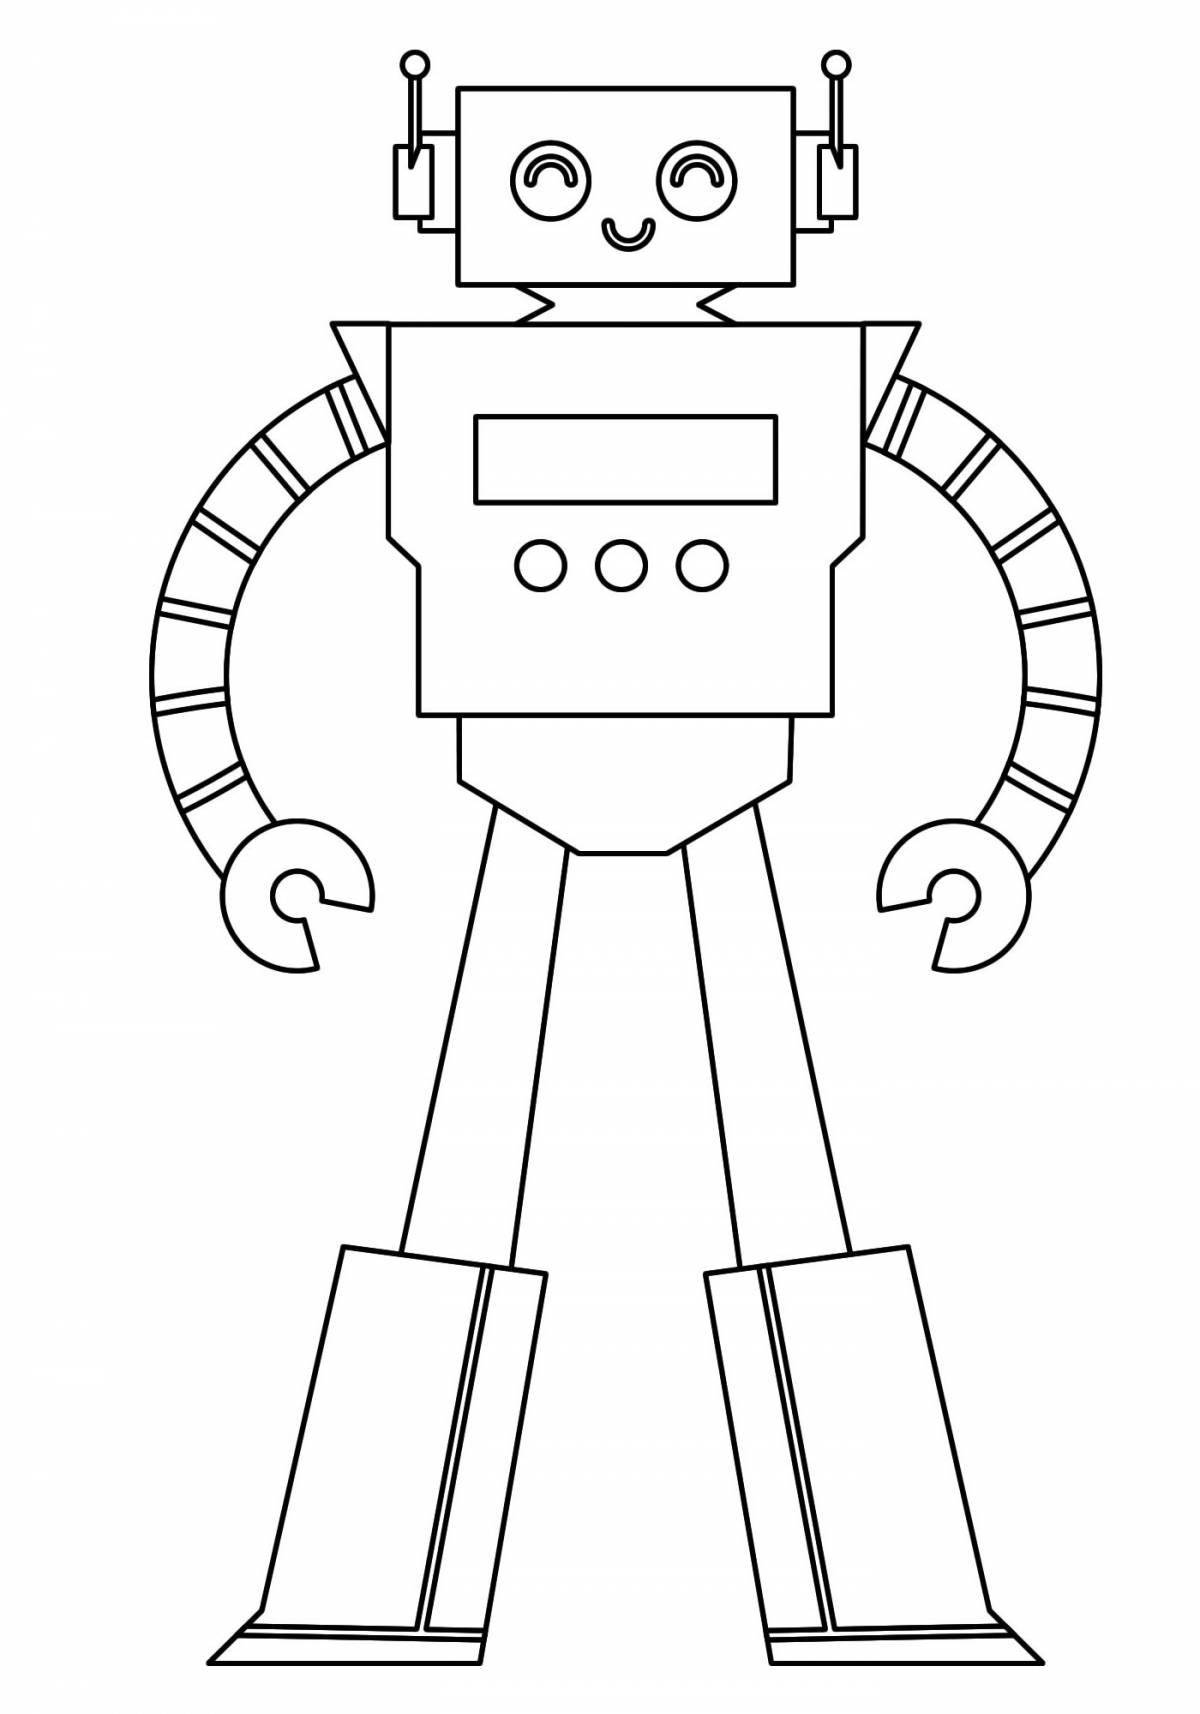 Amazing tobot coloring pages for kids